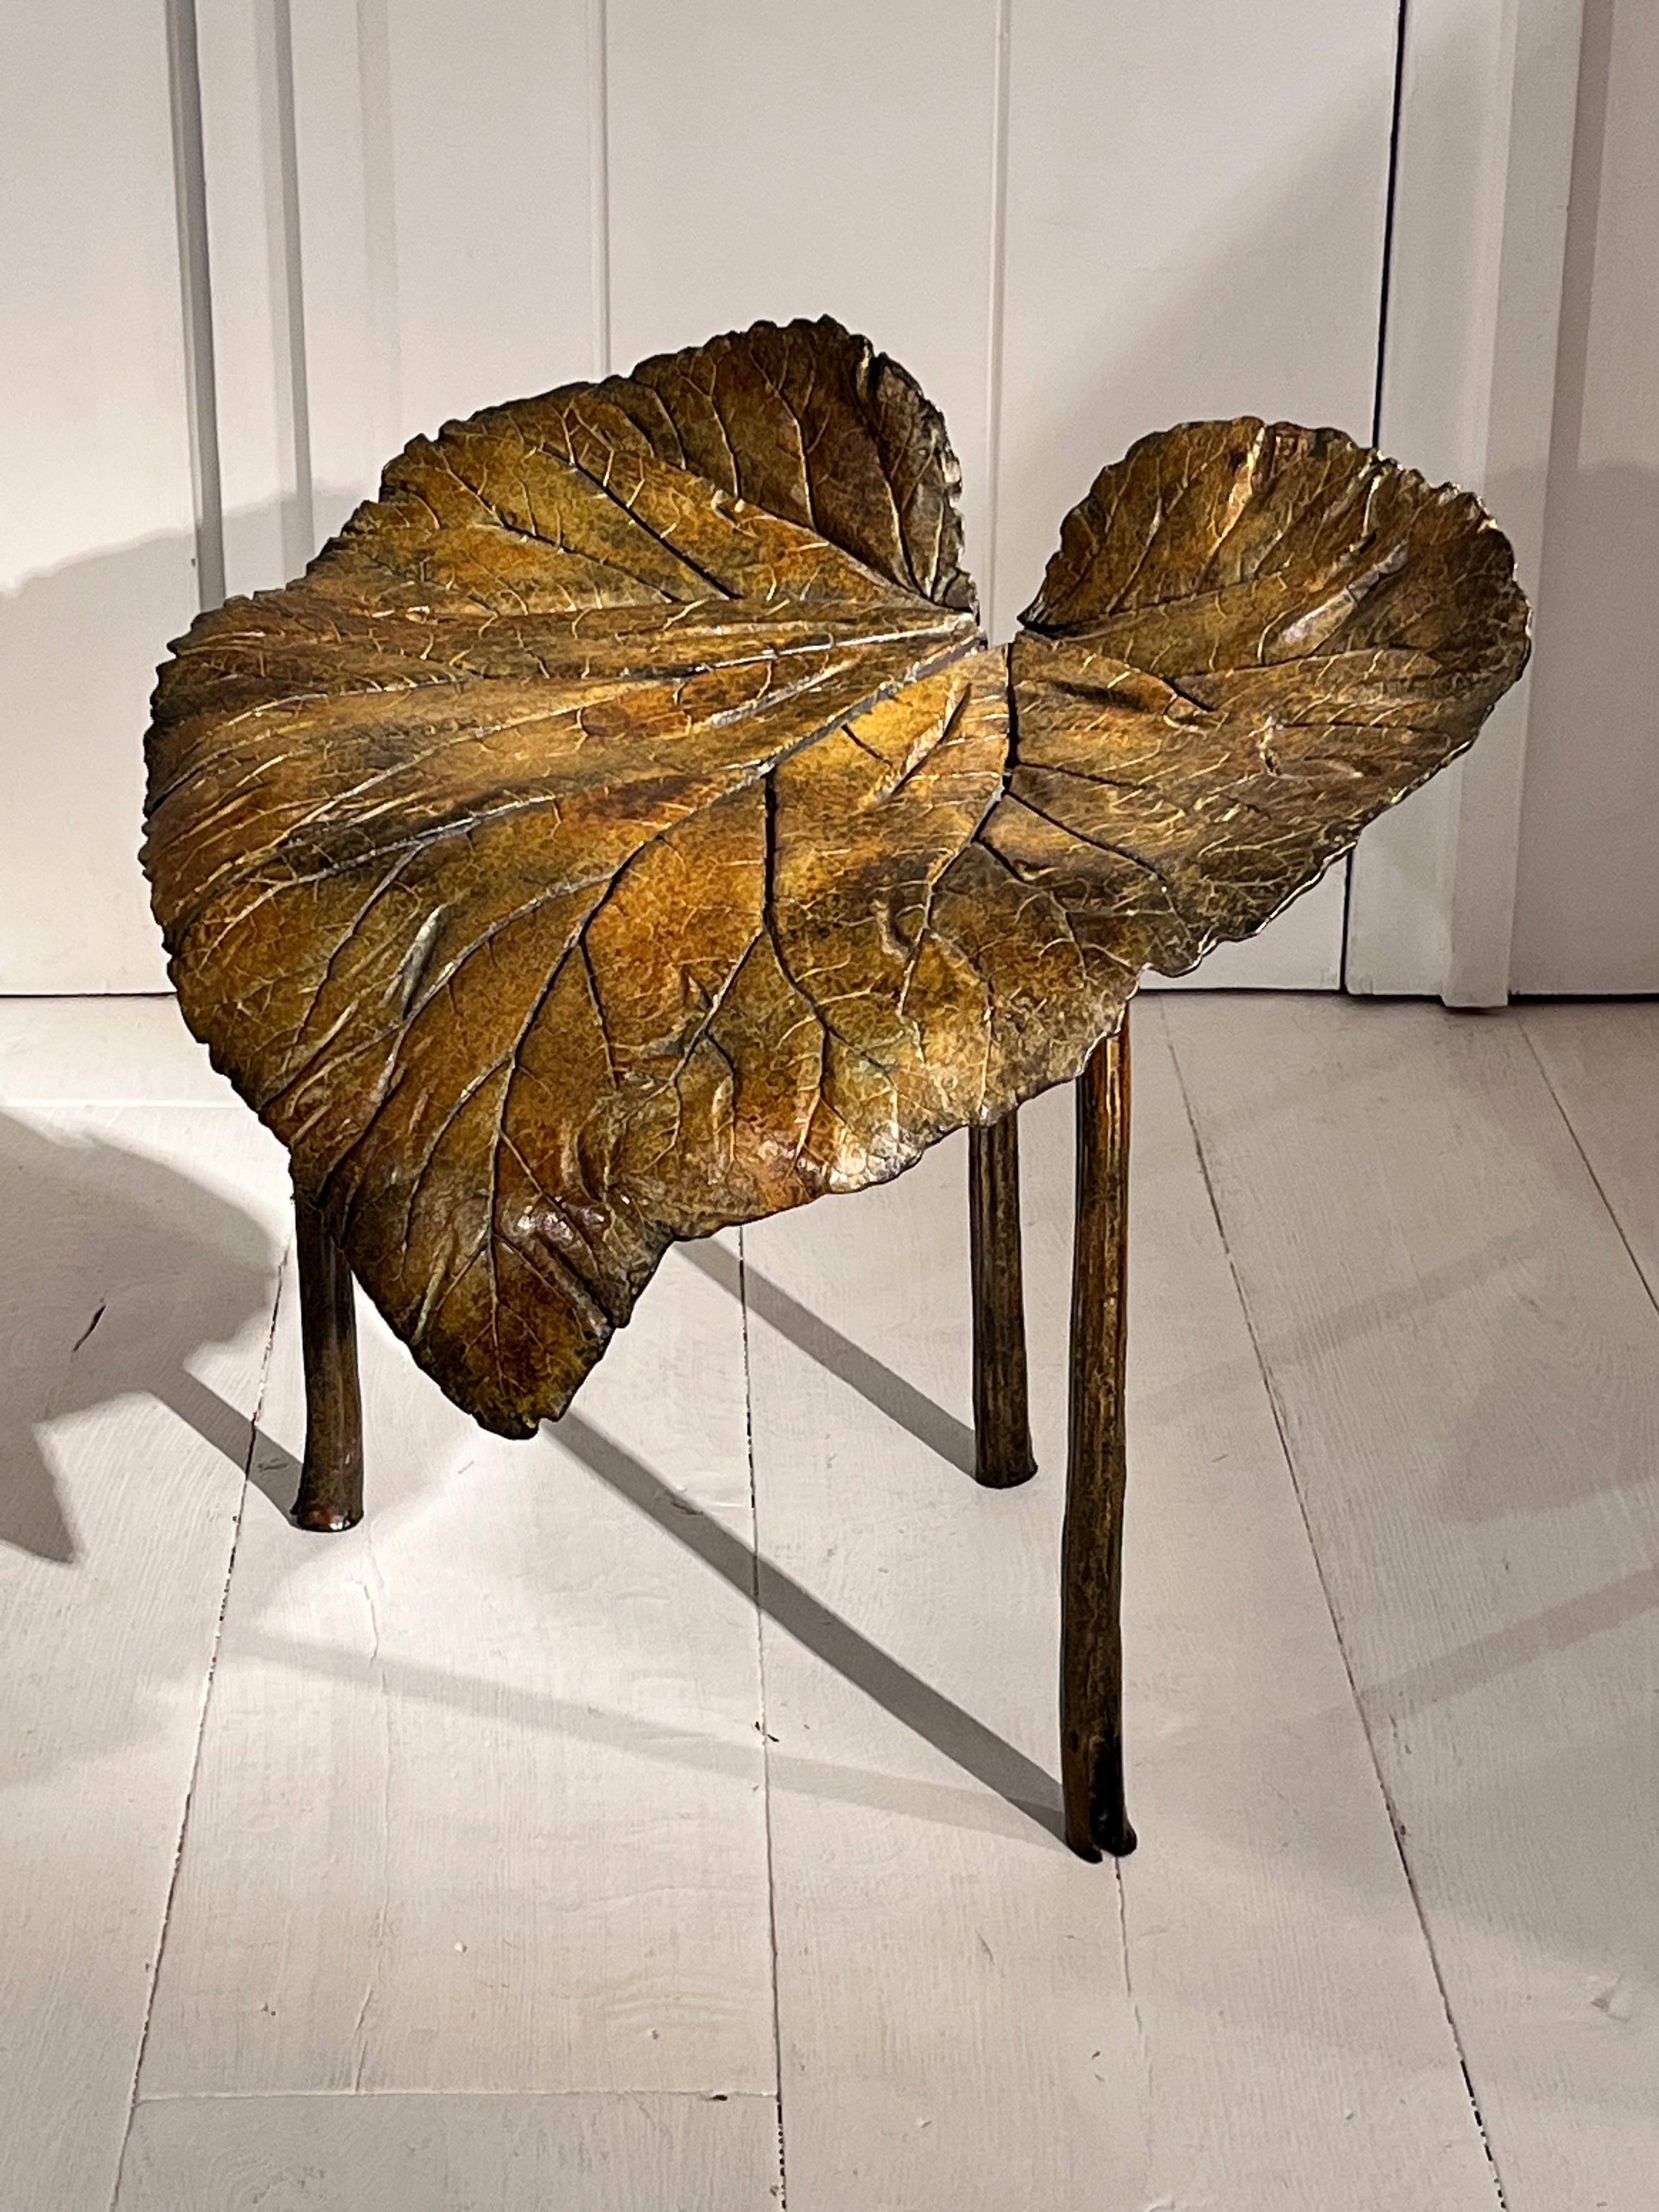 Armchair III (brown patina)
Bronze - Collectible Design
Handcrafted cast bronze
Edition of 8 pieces + 4 AP
Signed and numbered
63 x 67 x 52 cm
Seat height +- 47 cm